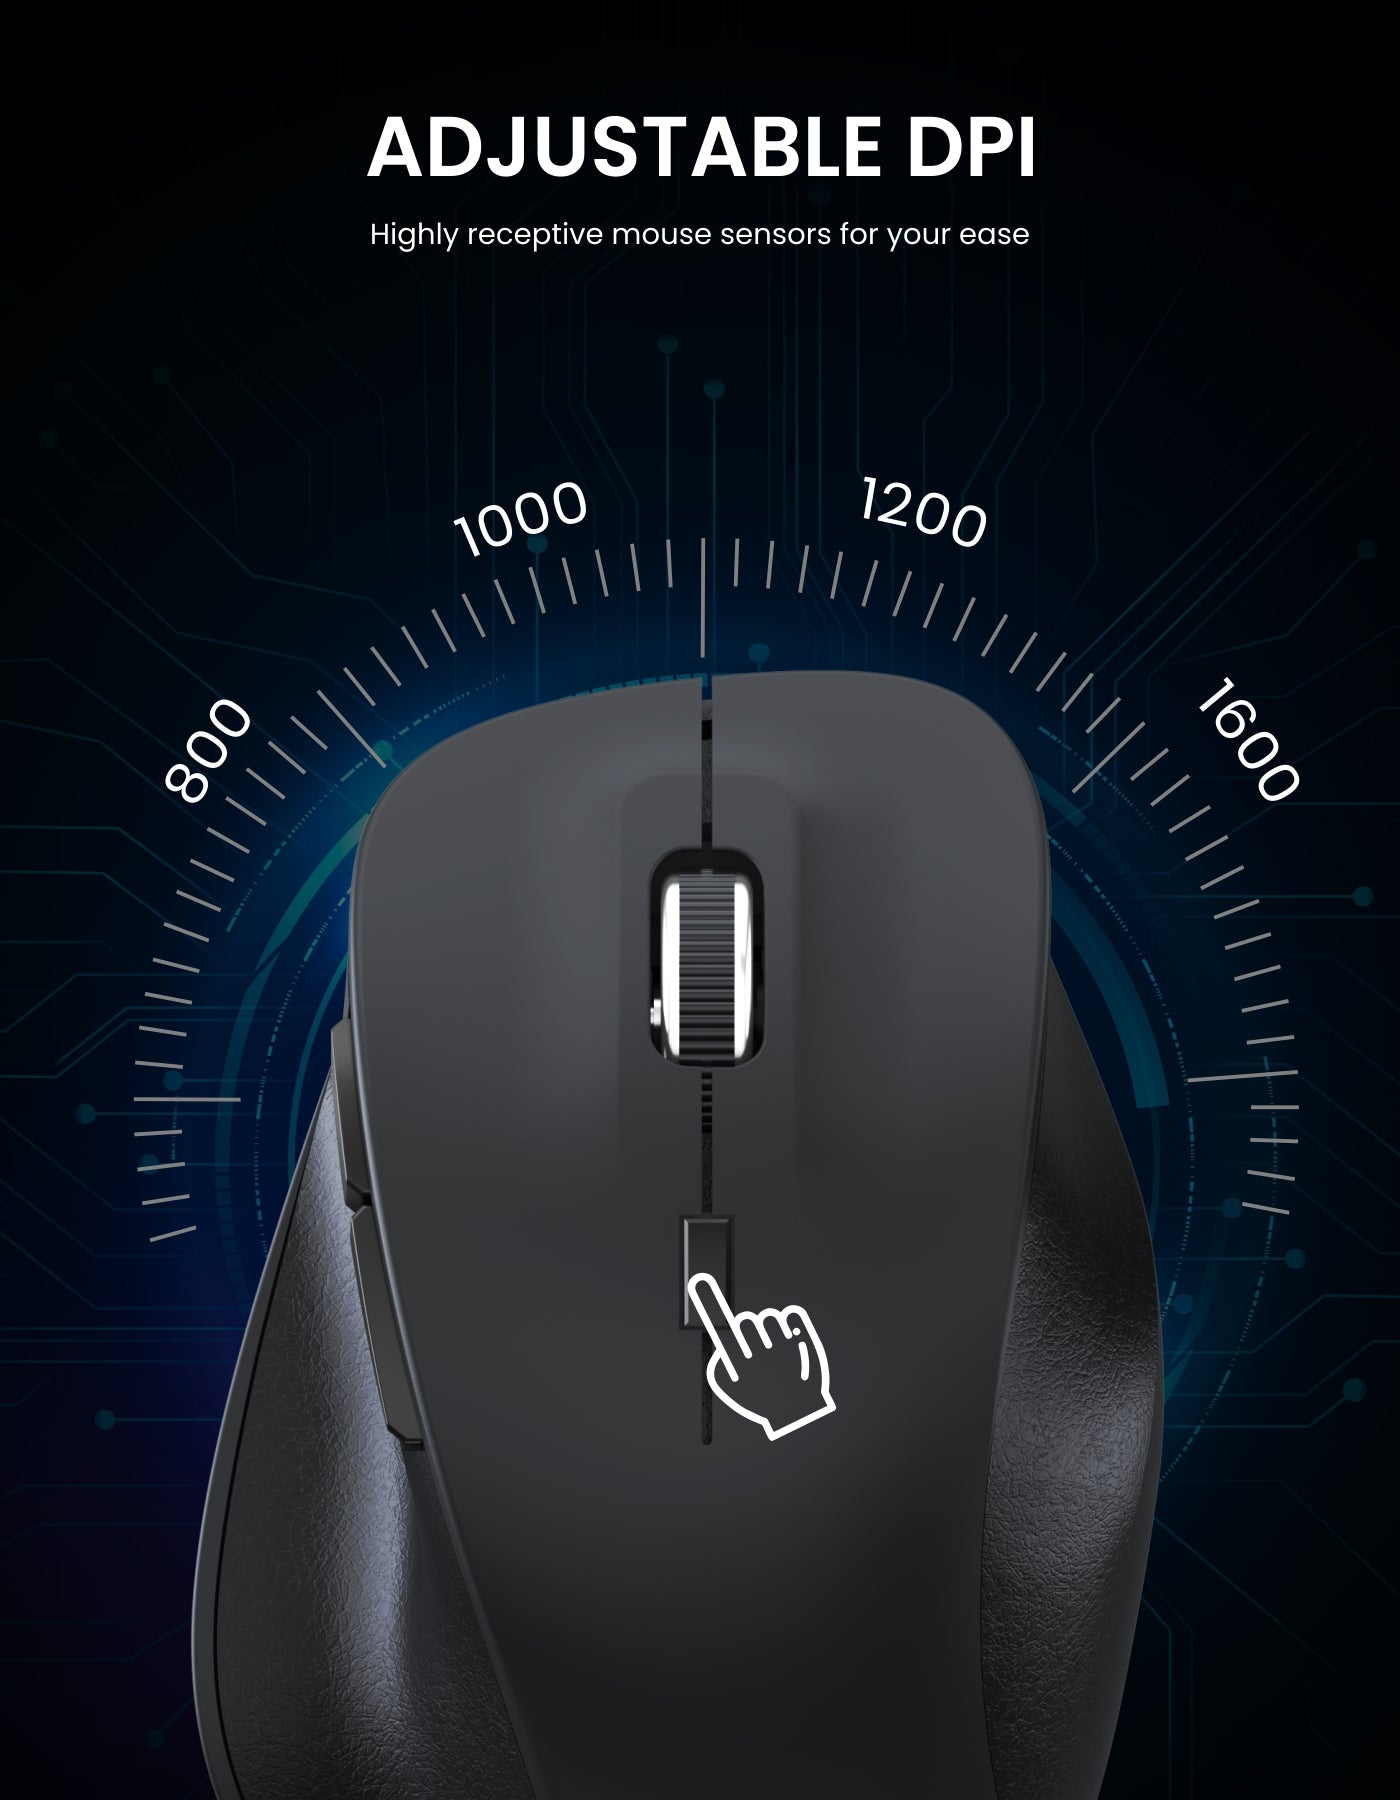 true wireless mouse of portronics Toad 24 with adjustable DPI